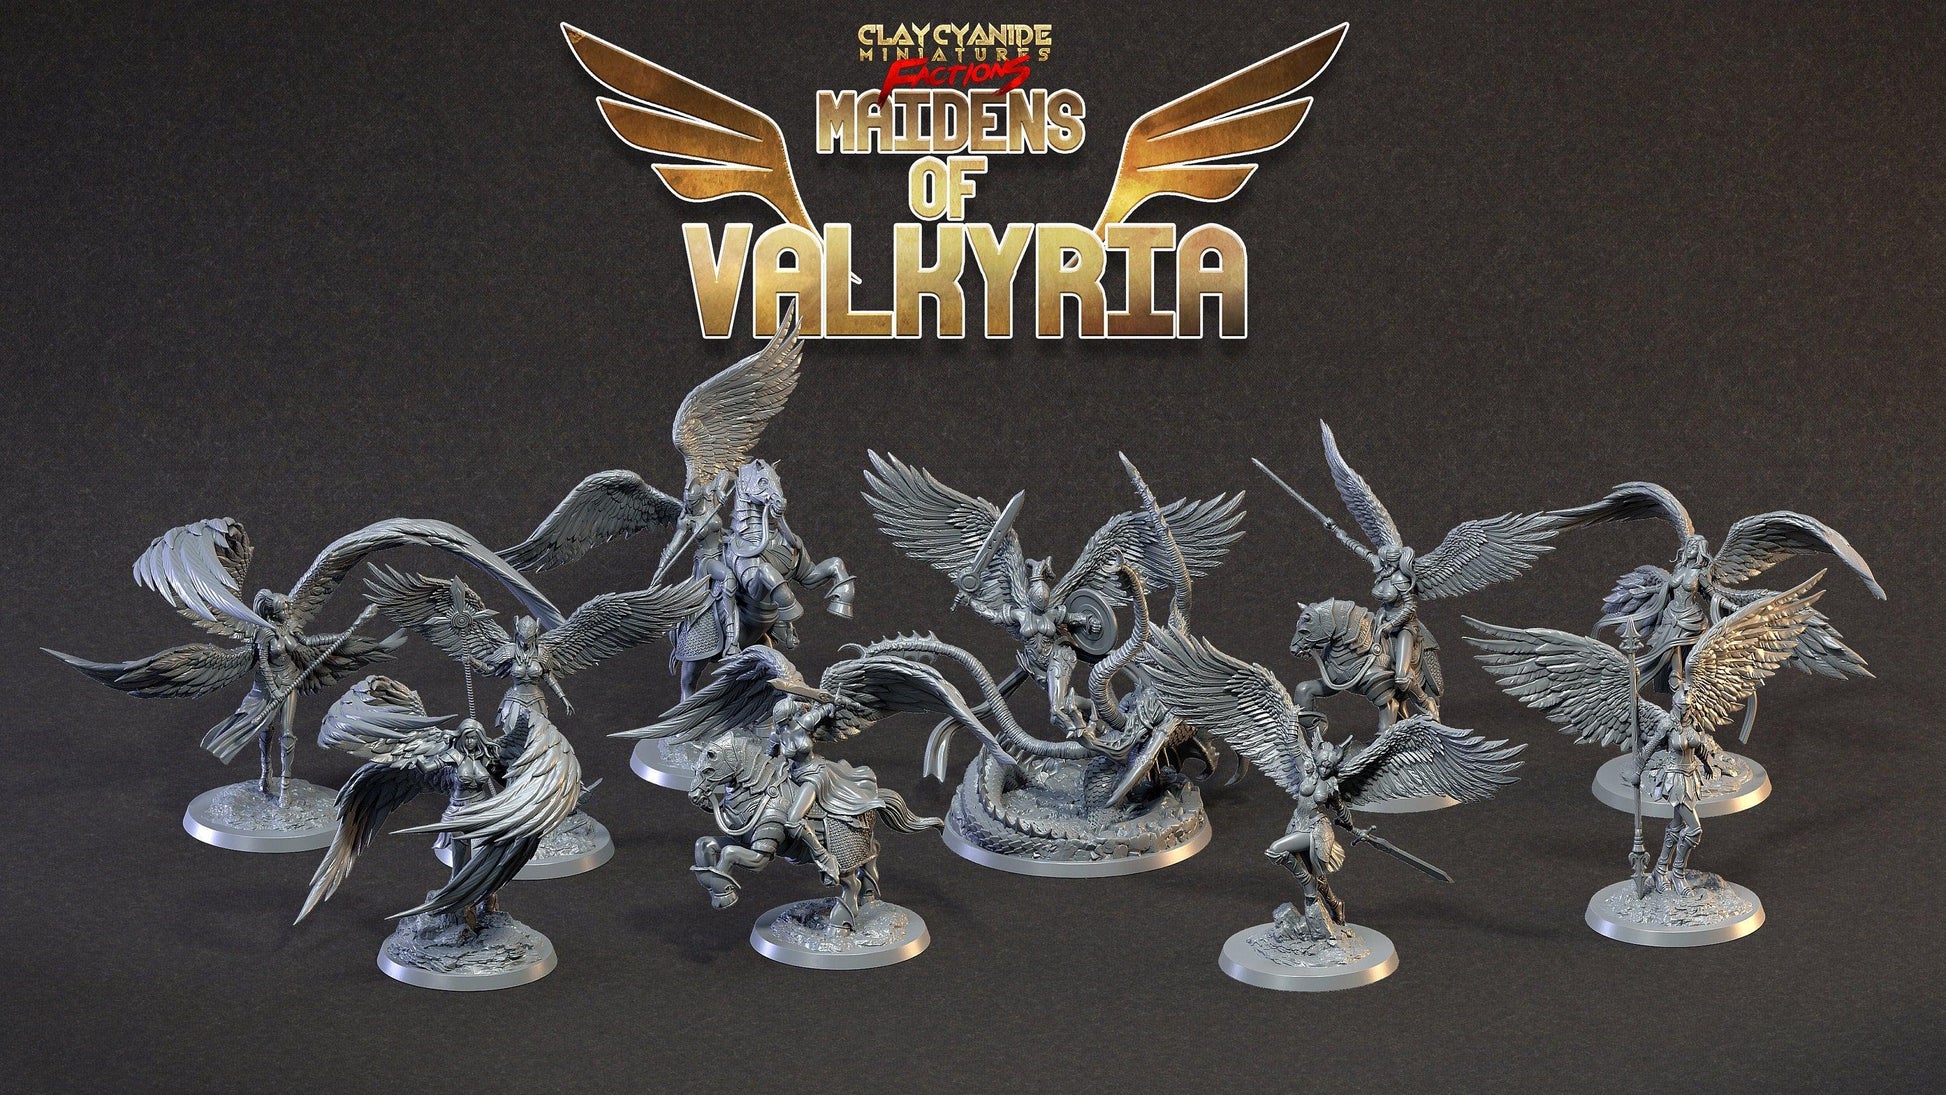 Valkyrie Viking Miniature | Kara Clay Cyanide | Maidens of Valkyria | Tabletop Gaming | DnD Miniature | Dungeons and Dragons - Plague Miniatures shop for DnD Miniatures